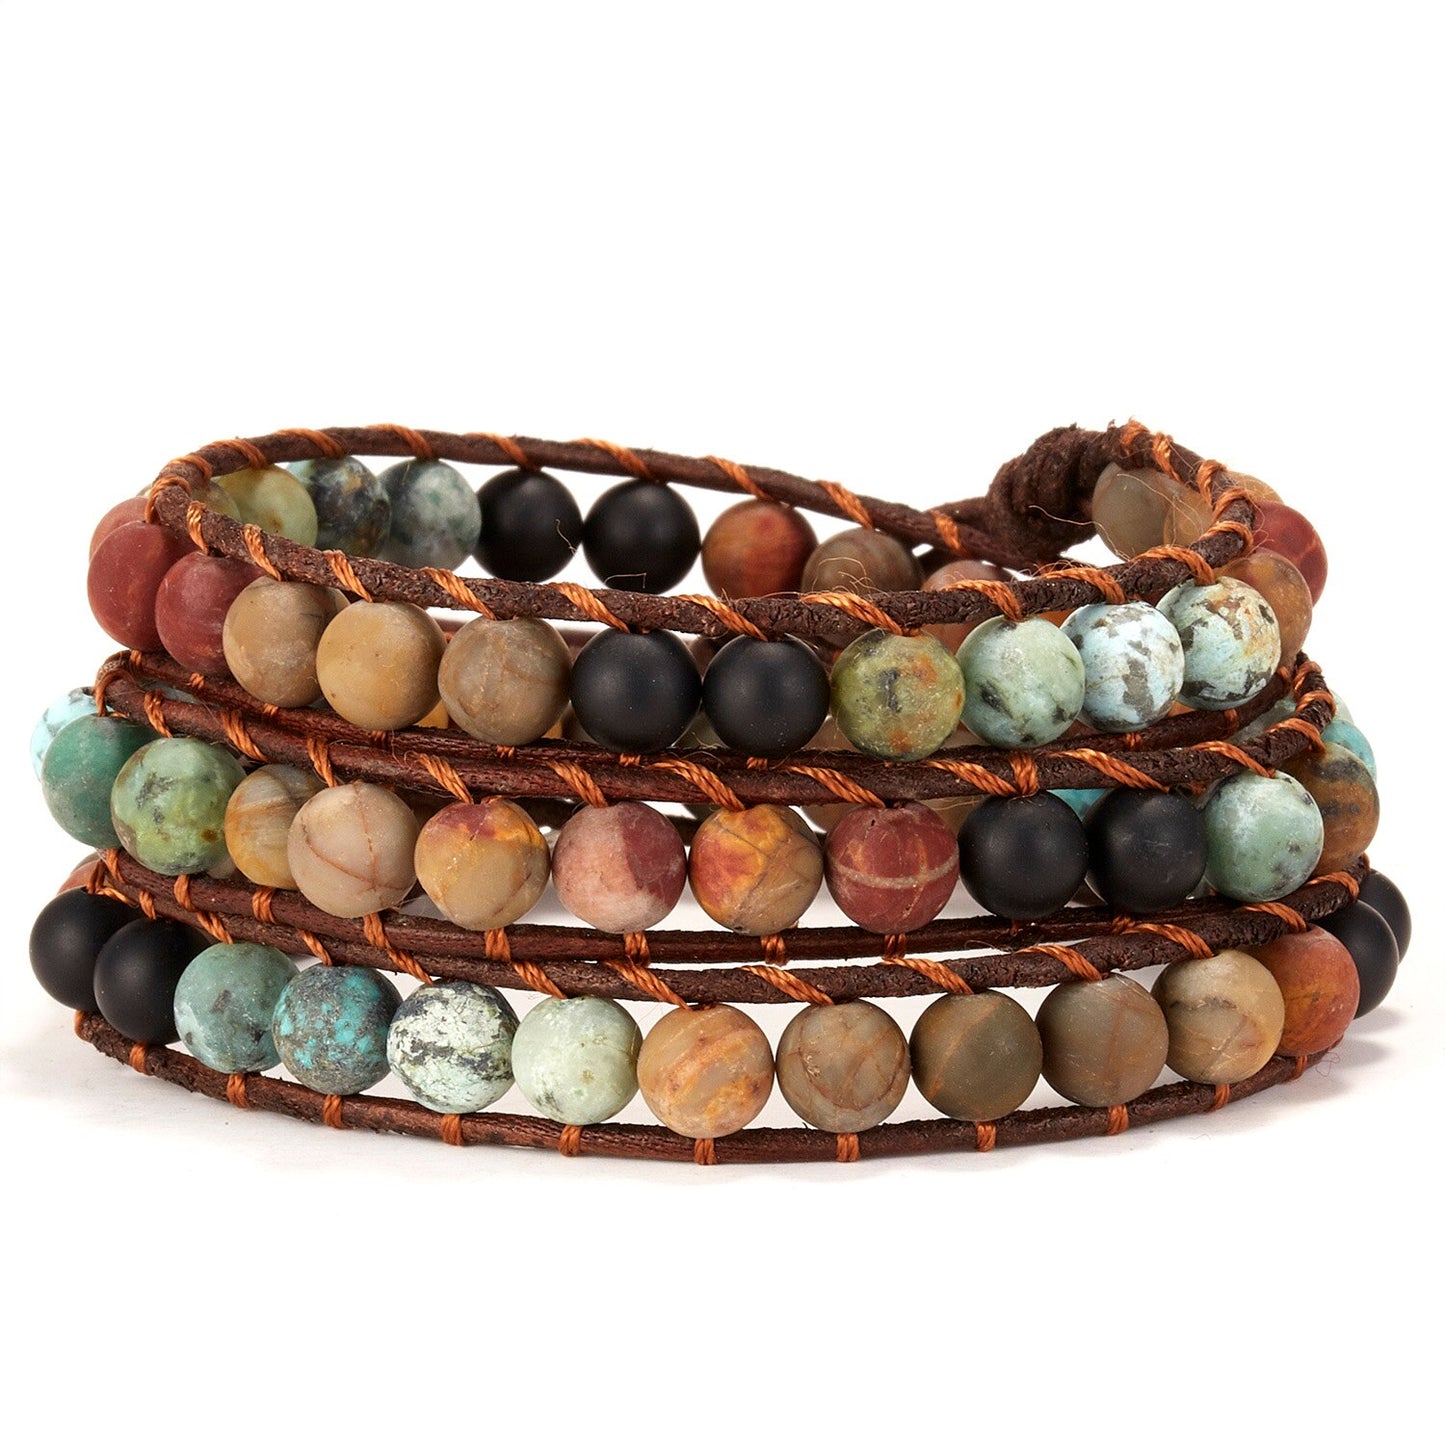 New Fashion Mixed Color Natural Stone Bracelet For Women Men Chakra Heart Wrap Leather Chain Bracelet&Bangle Charm Jewelry - BR18Y0558 / Adjustable